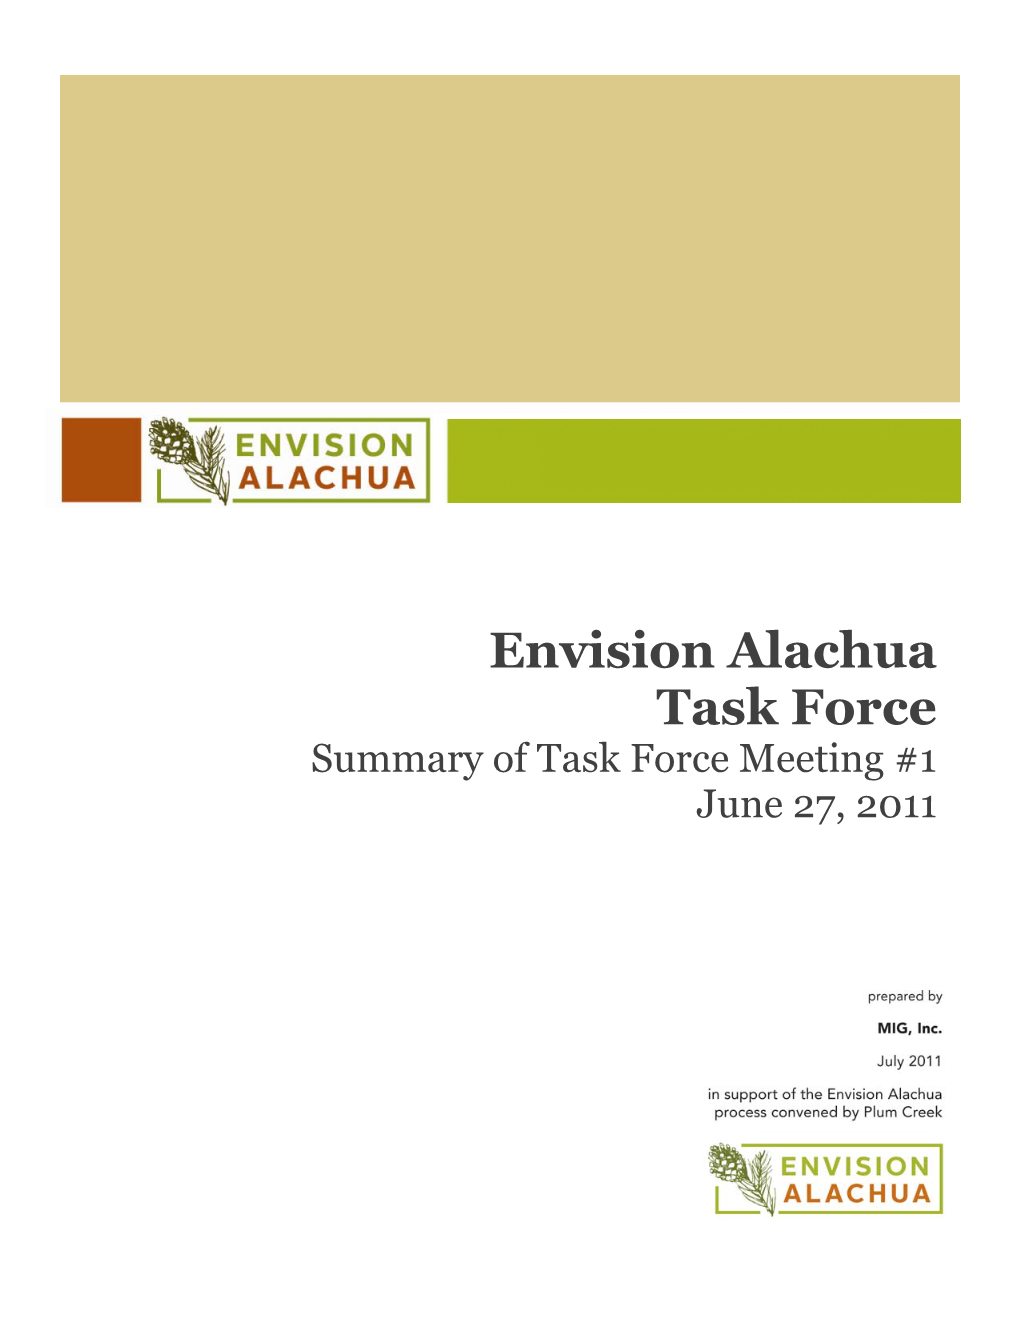 Envision Alachua Task Force Meeting #1